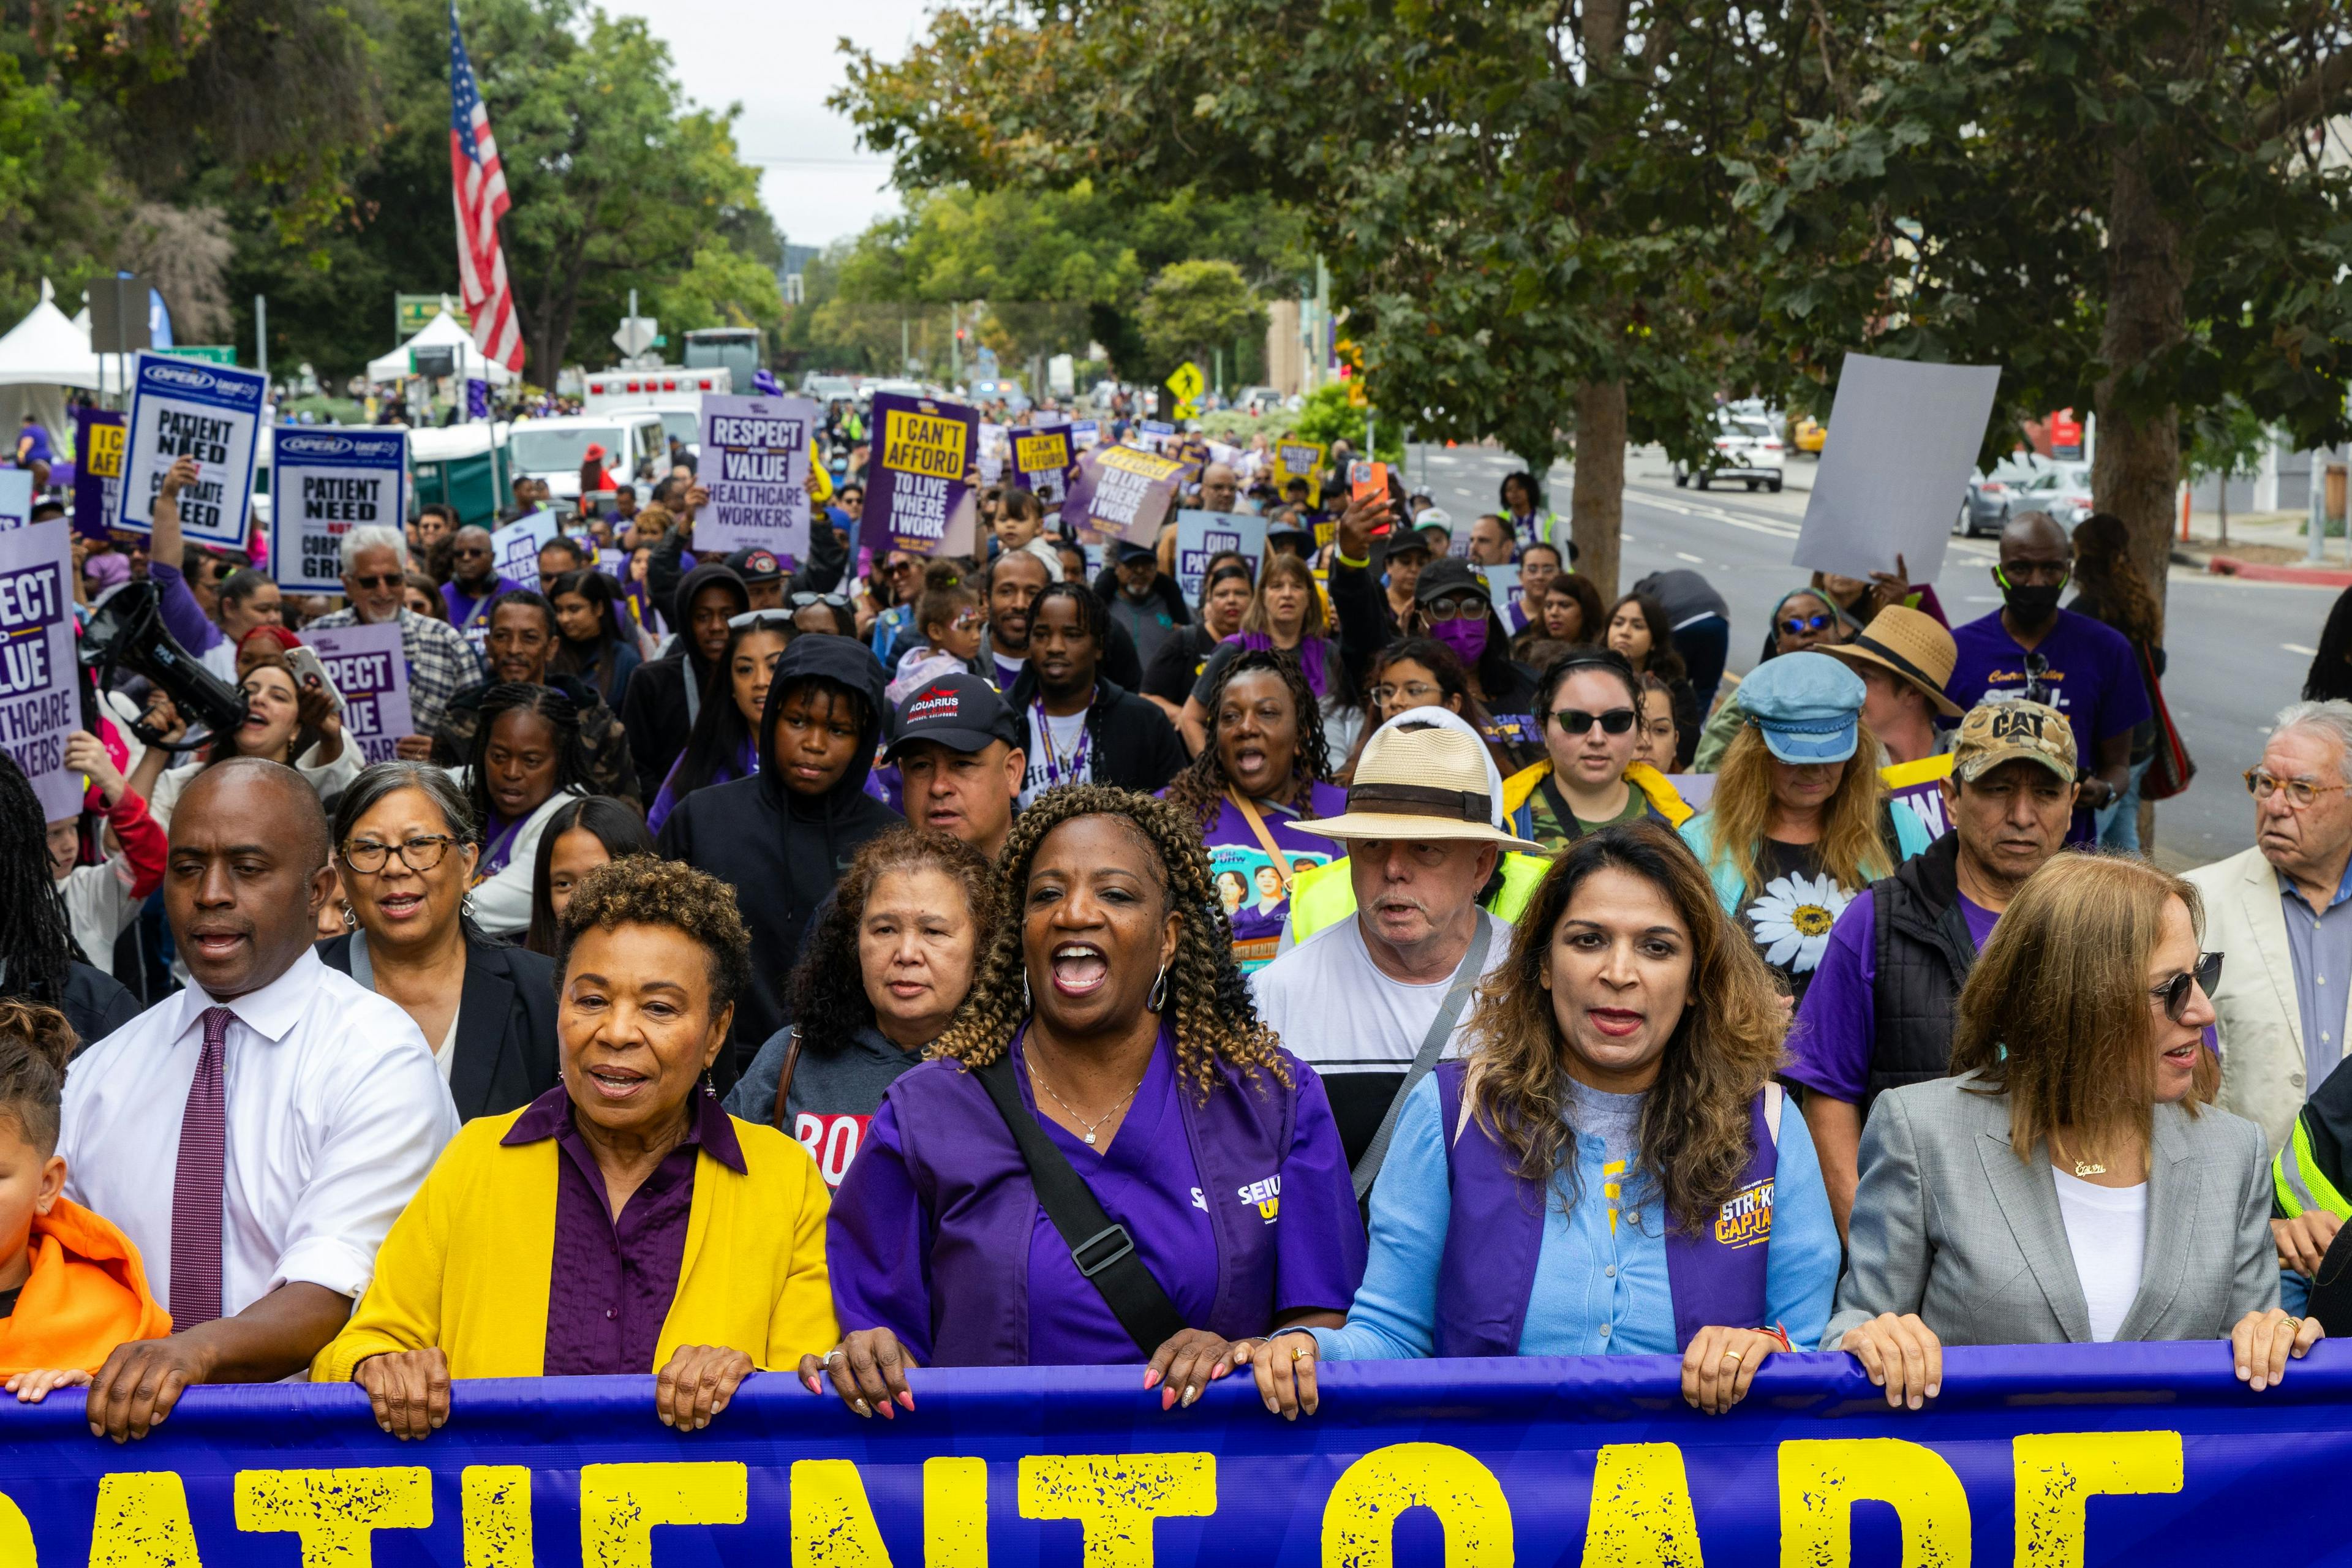 Kaiser Permanente and its unions have reached a tentative deal on a new four-year contract. Union workers will begin voting to ratify the deal next week. (Image: SEIU-UHW)